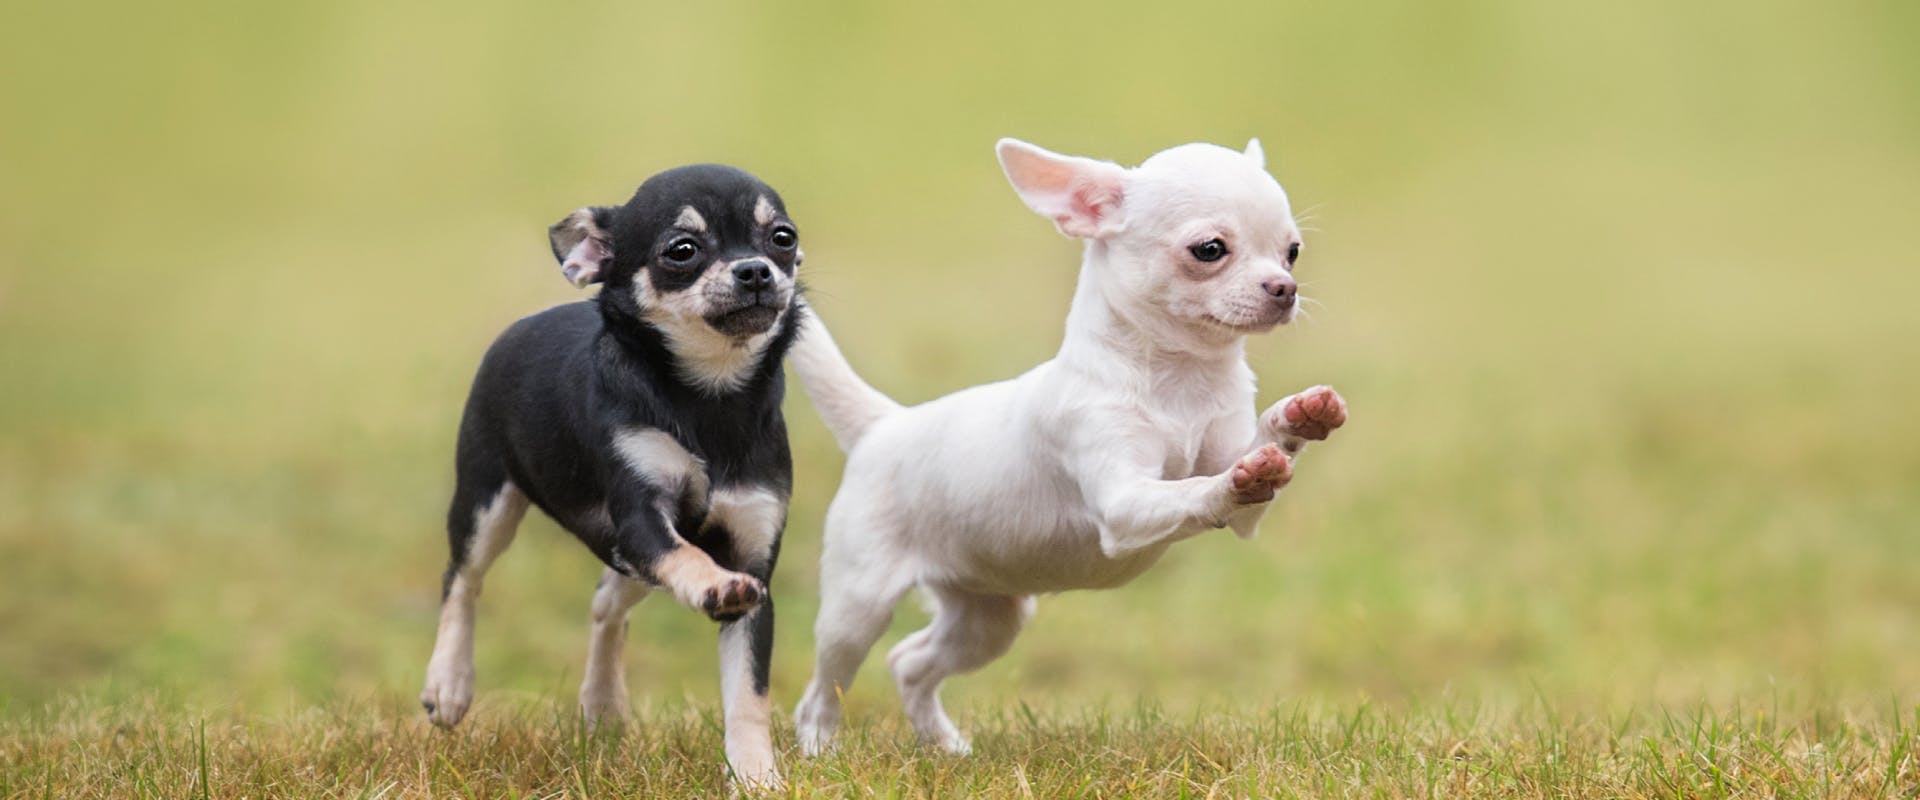 two small dogs running through a park